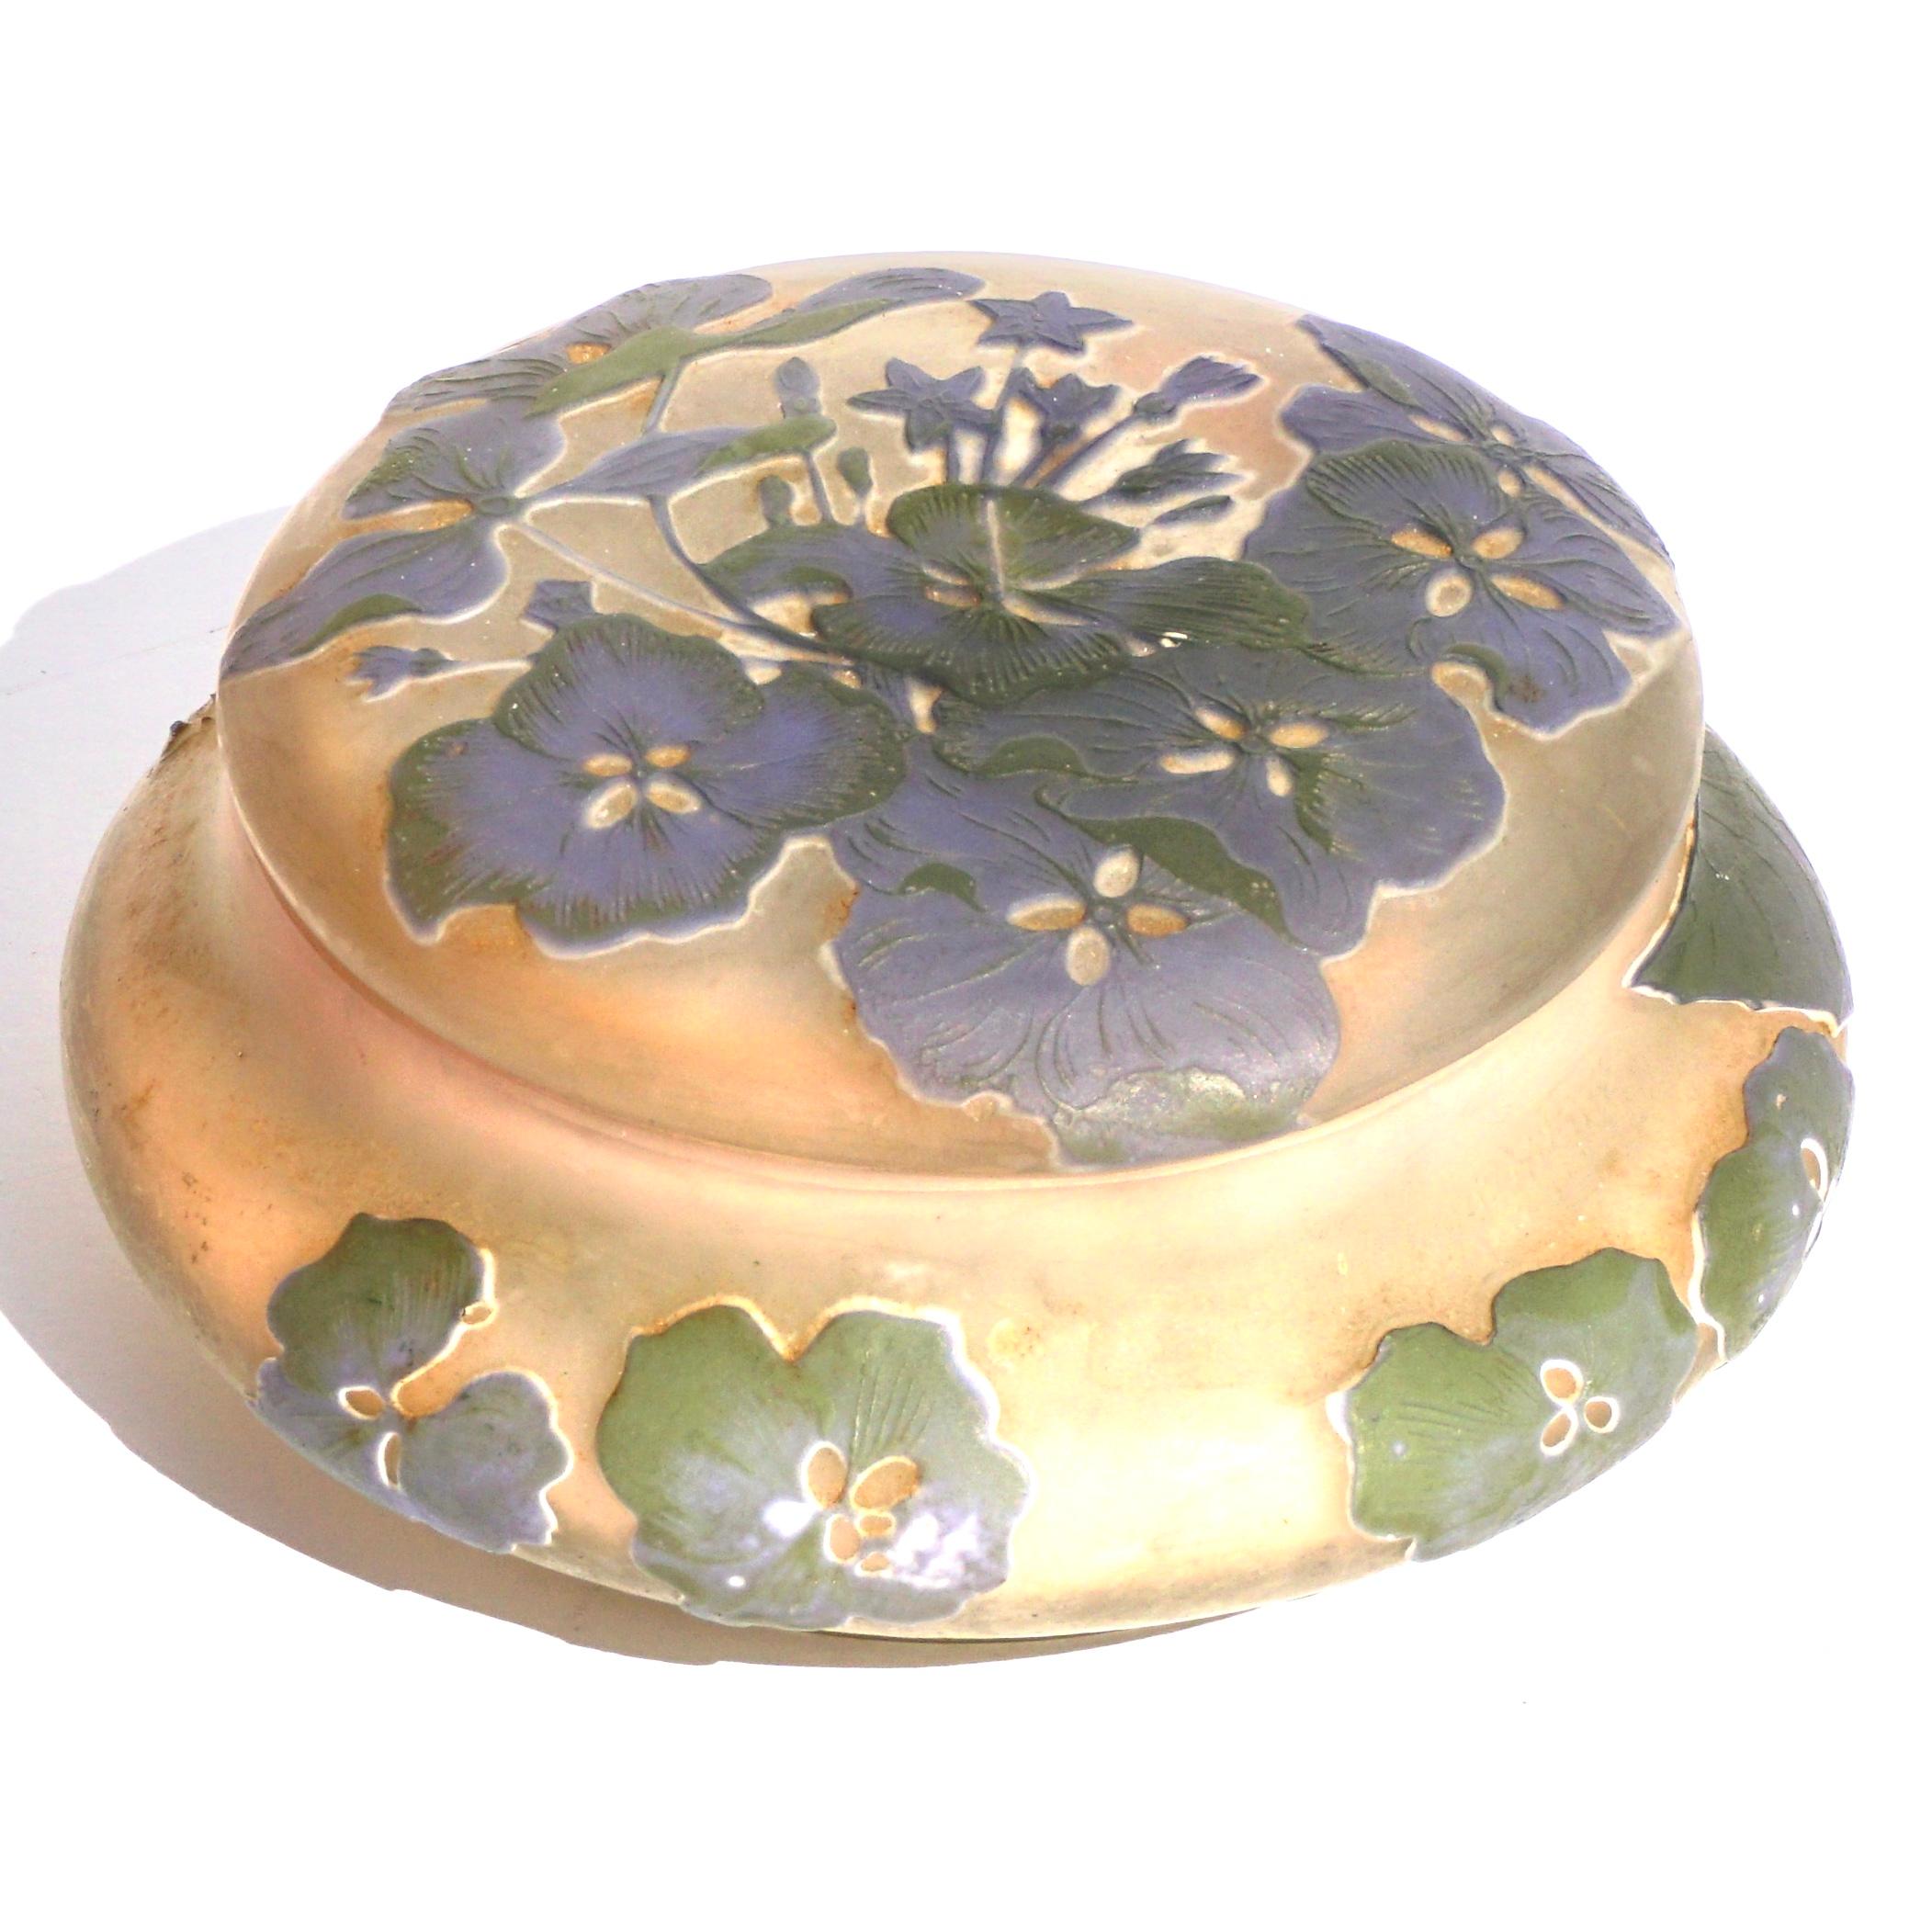 Gallé Cameo glass wheel carved and acid etched hydrangeas covered box, circa 1910. Art Nouveau.

Marks: (star) Gallé (1904-1907)

Height: 3 Inches, diameter 5.75 inches (7.4 x 14.6 cm)

Condition: very good with no damage or repairs. Could use